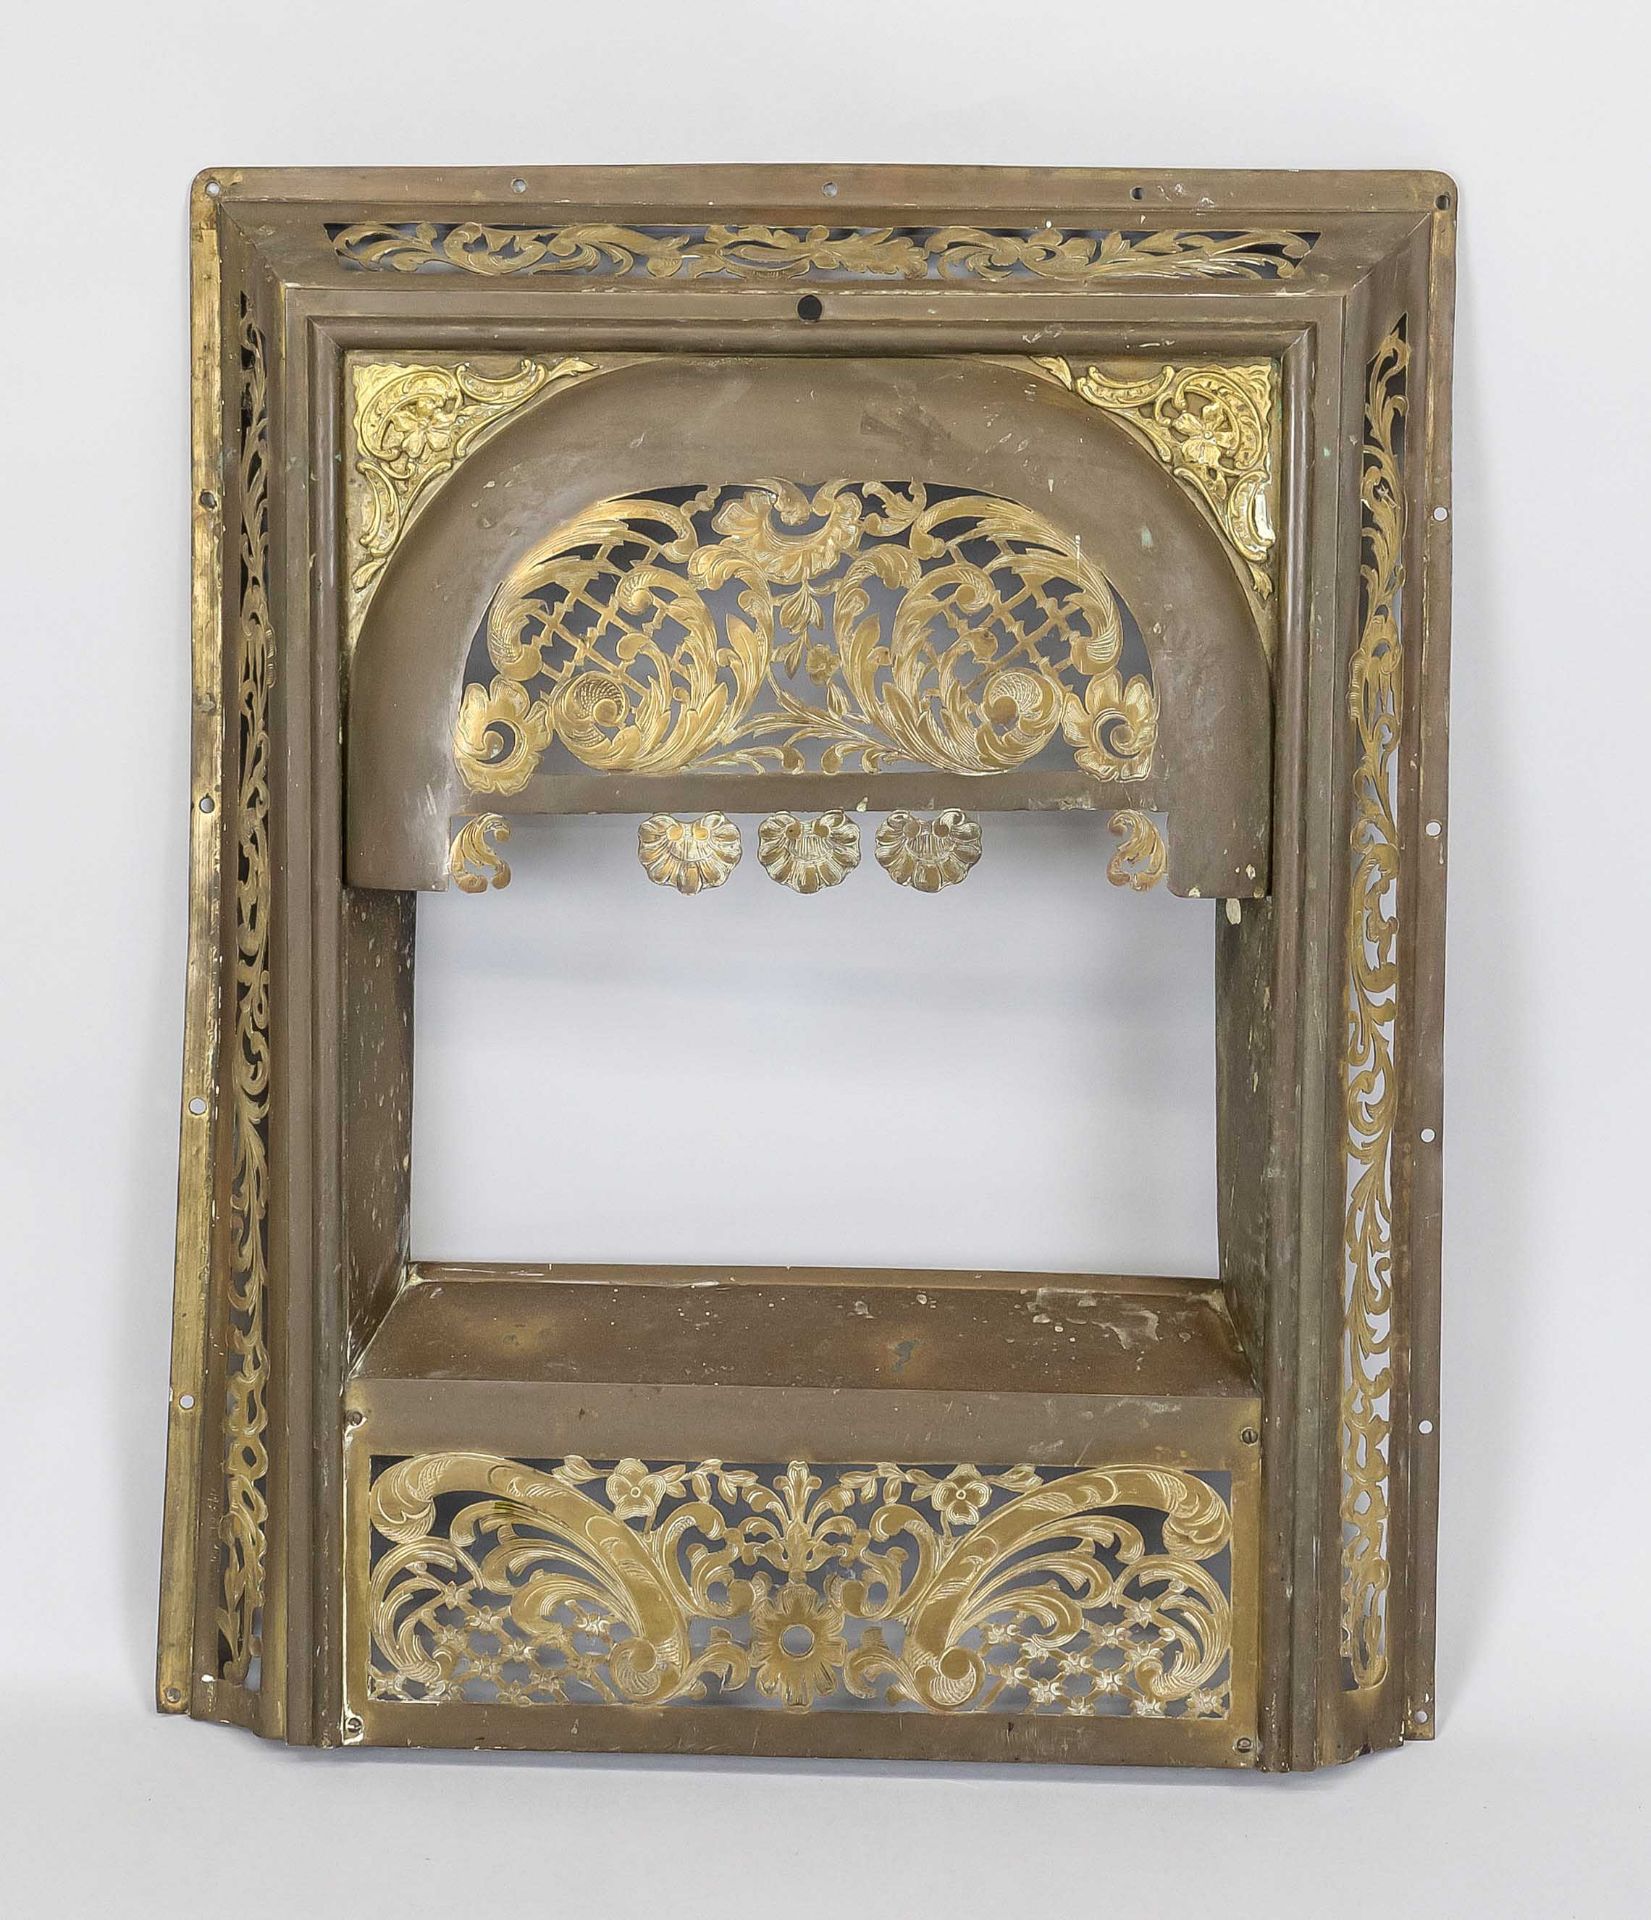 Fireplace screen, late 19th century, copper and brass. Open-worked with symmetrically arranged